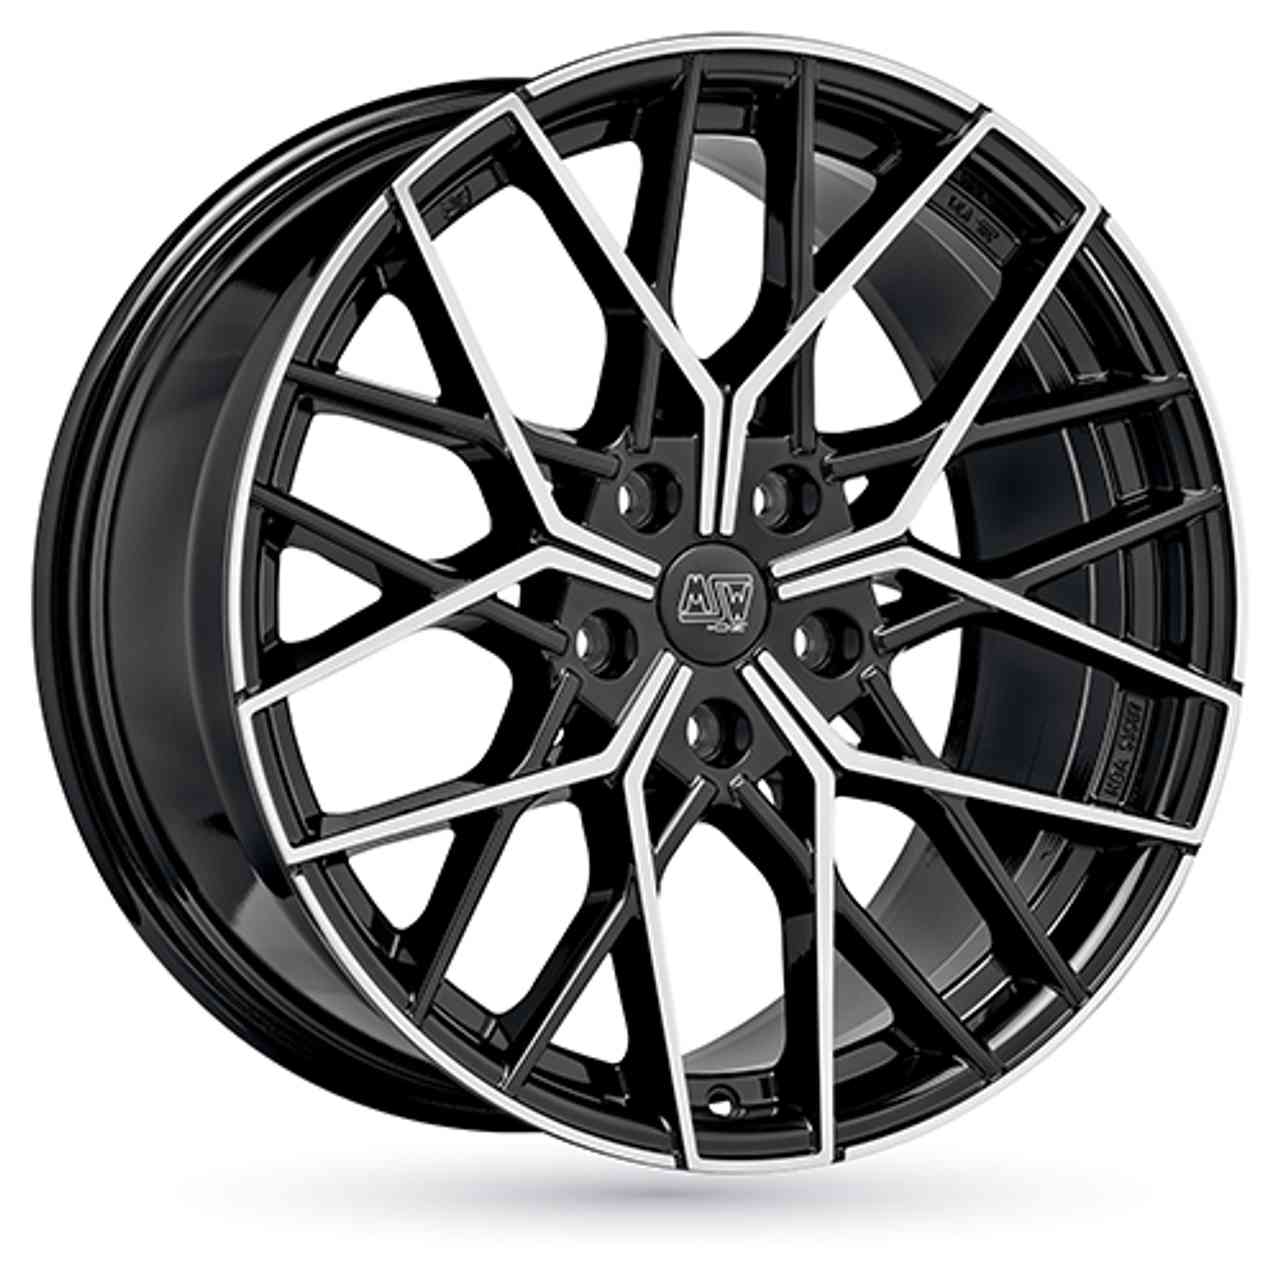 MSW (OZ) MSW 74 gloss black full polished 8.0Jx19 5x112 ET35